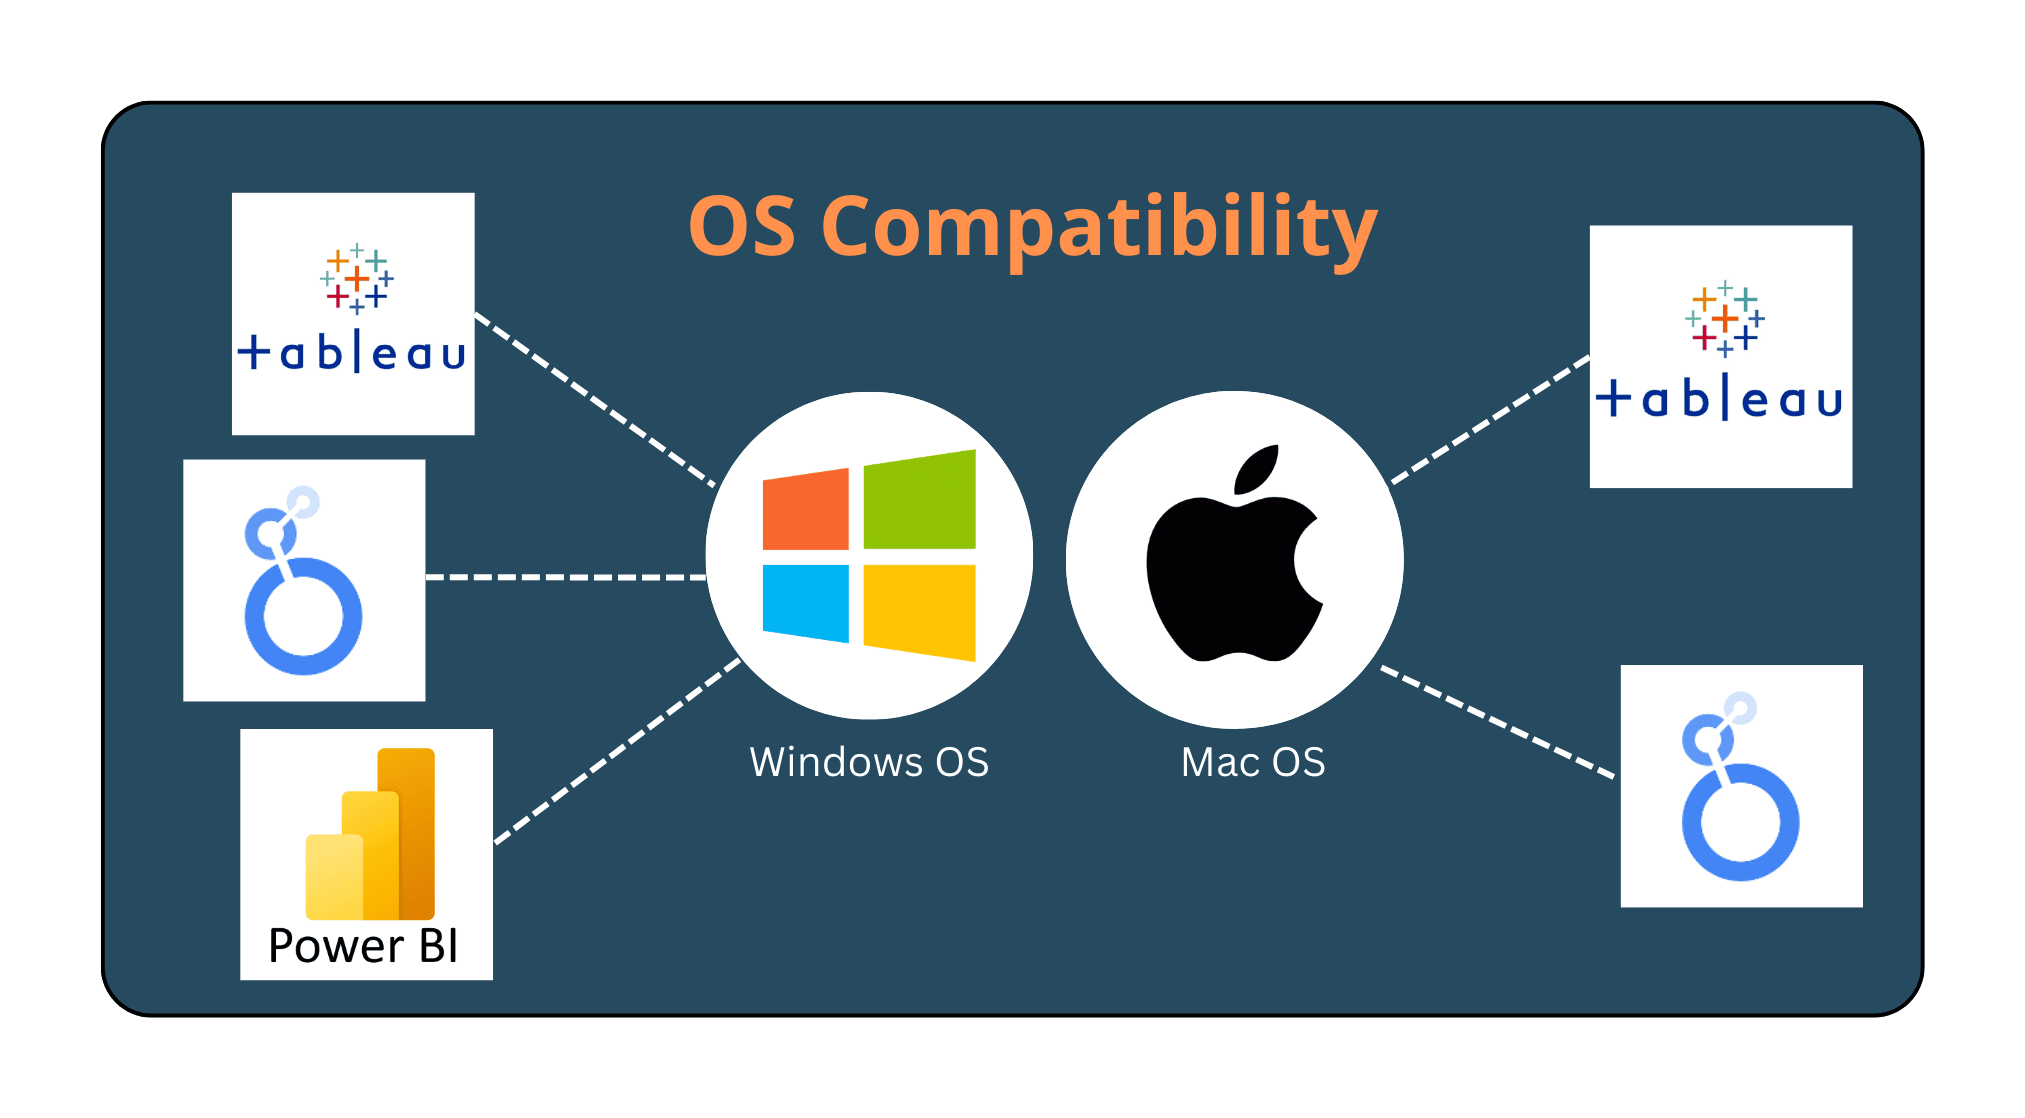 OS compatibility comparison between Power BI, Tableau and Looker Studio.